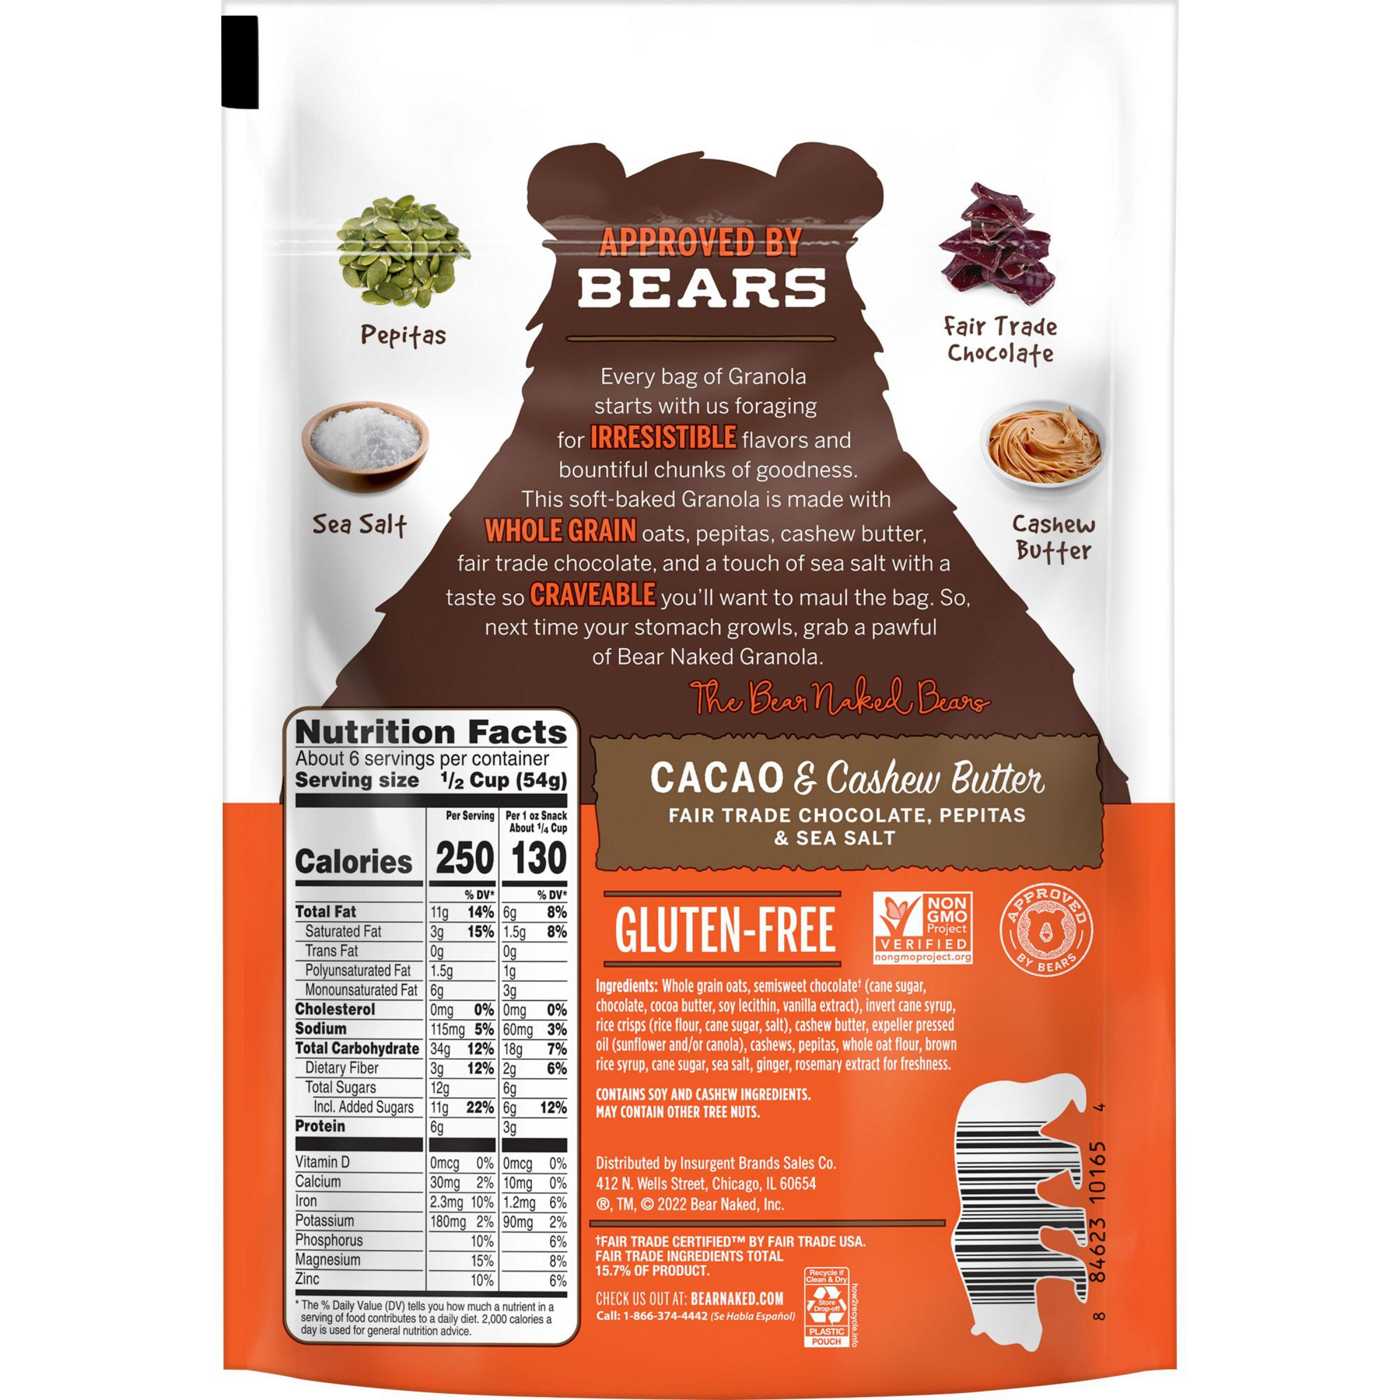 Bear Naked Granola - Cacao & Cashew Butter; image 4 of 8